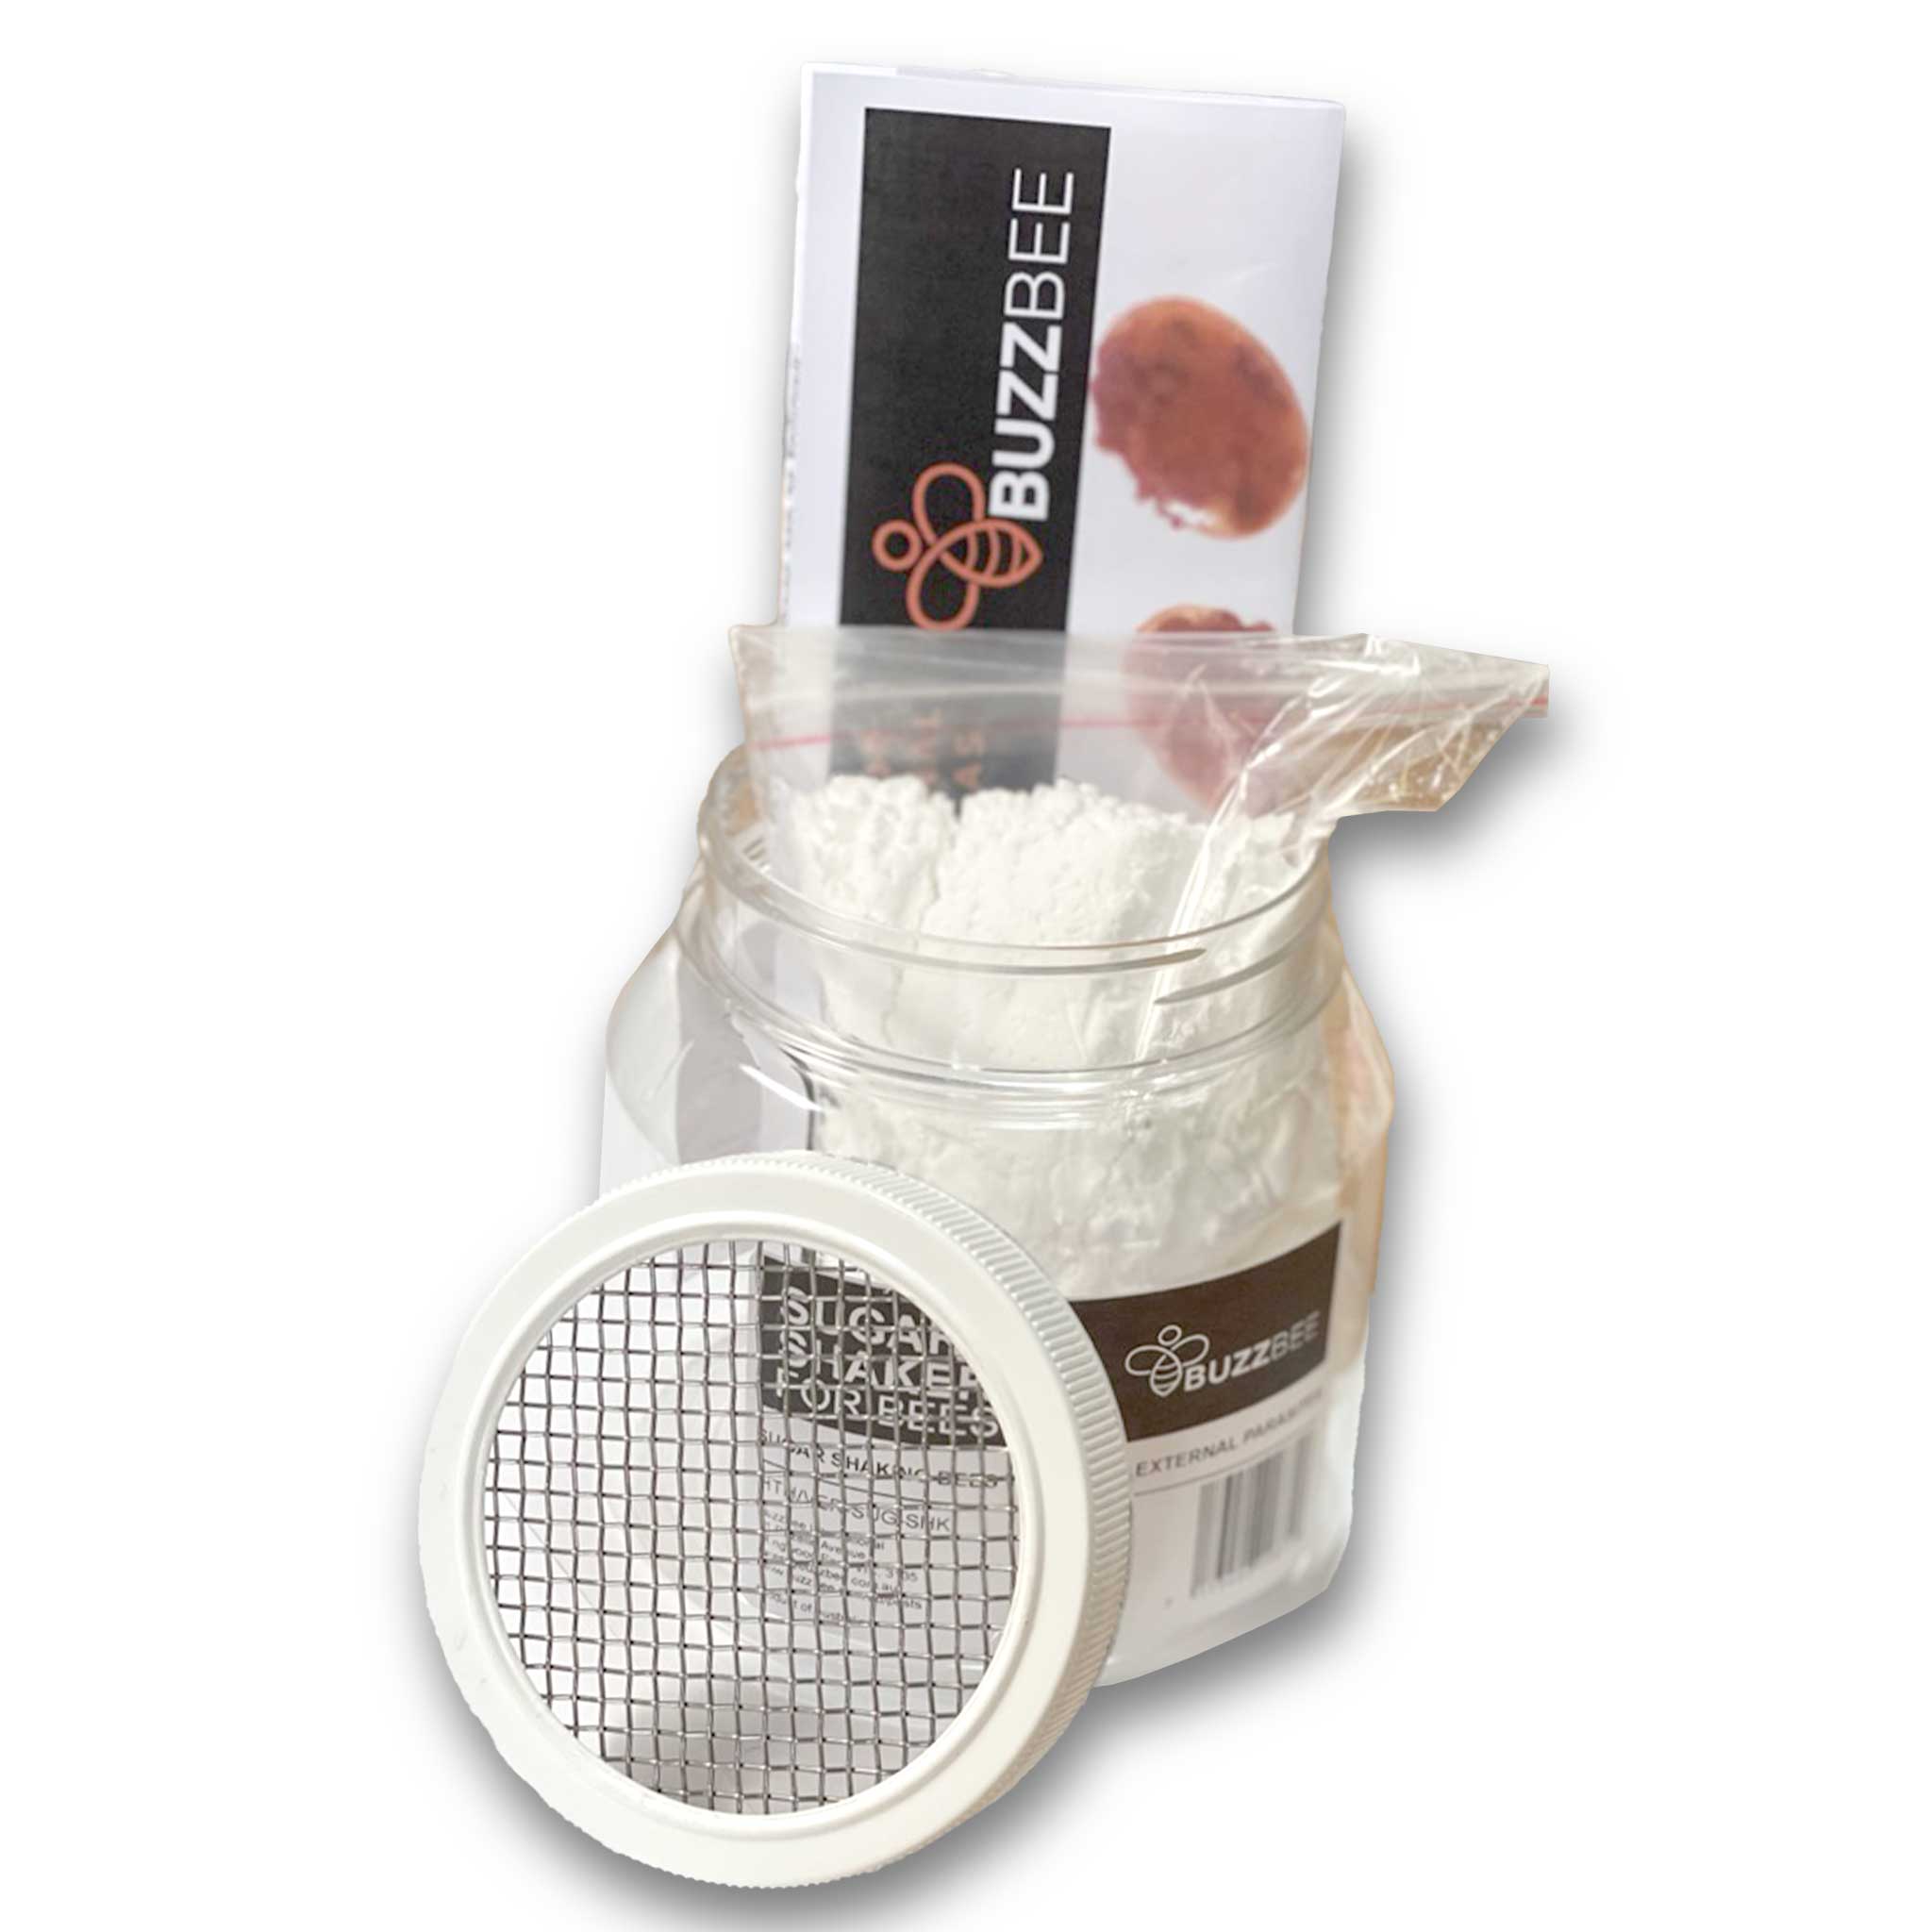 Sugar Shaker for Detecting External Parasites such as Varroa Mites - Health collection by Buzzbee Beekeeping Supplies